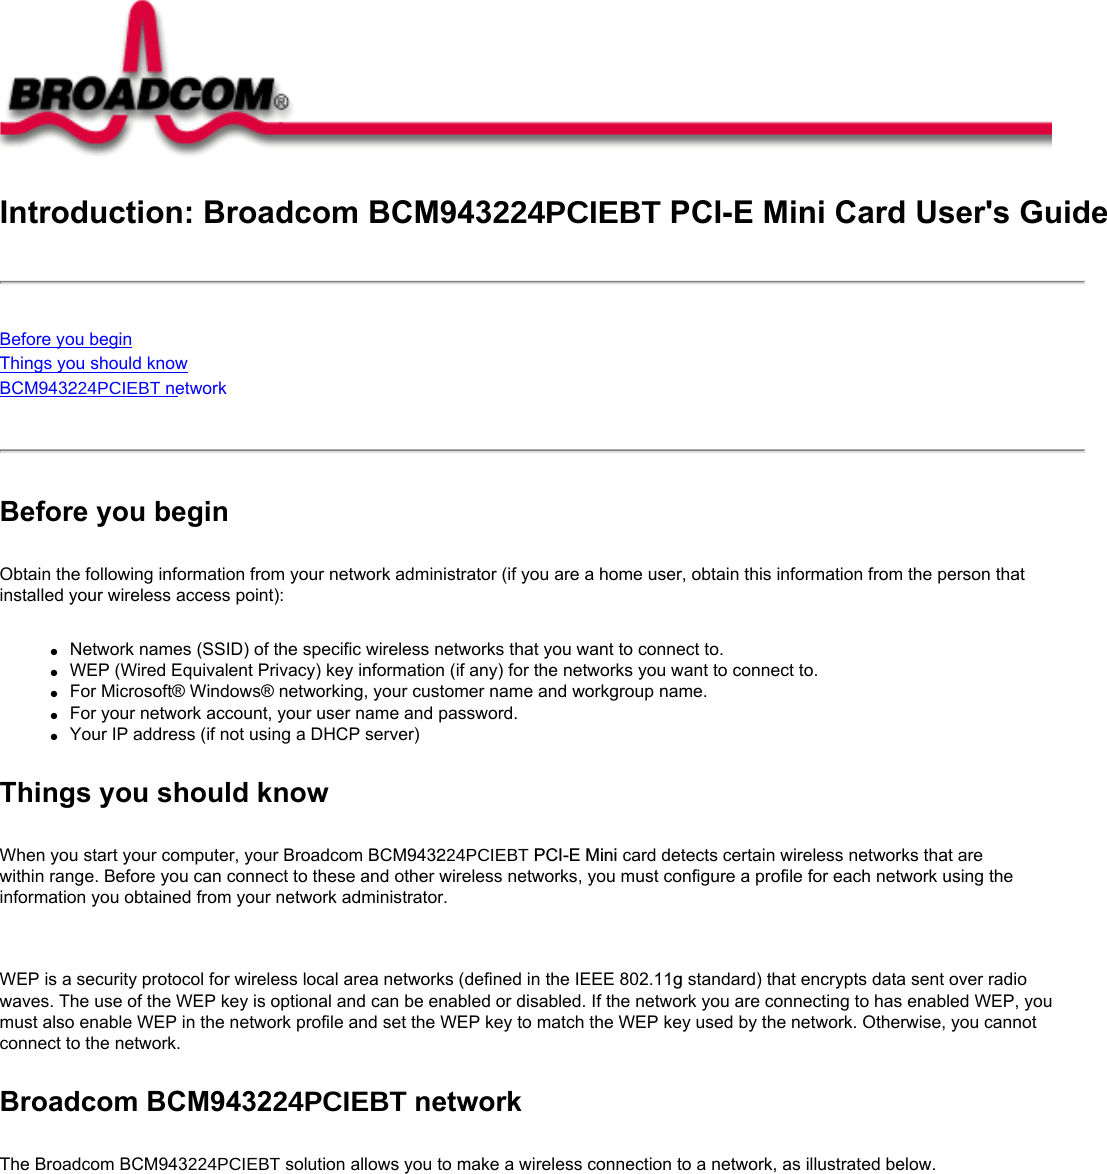 Introduction: Broadcom BCM943224PCIEBT PCI-E Mini Card User&apos;s GuideBefore you beginThings you should knowBCM943224PCIEBT network Before you beginObtain the following information from your network administrator (if you are a home user, obtain this information from the person that installed your wireless access point):●     Network names (SSID) of the specific wireless networks that you want to connect to.●     WEP (Wired Equivalent Privacy) key information (if any) for the networks you want to connect to.●     For Microsoft® Windows® networking, your customer name and workgroup name.●     For your network account, your user name and password.●     Your IP address (if not using a DHCP server)Things you should knowWhen you start your computer, your Broadcom BCM943224PCIEBT PCI-E Mini card detects certain wireless networks that are within range. Before you can connect to these and other wireless networks, you must configure a profile for each network using the information you obtained from your network administrator.   WEP is a security protocol for wireless local area networks (defined in the IEEE 802.11g standard) that encrypts data sent over radio waves. The use of the WEP key is optional and can be enabled or disabled. If the network you are connecting to has enabled WEP, you must also enable WEP in the network profile and set the WEP key to match the WEP key used by the network. Otherwise, you cannot connect to the network.Broadcom BCM943224PCIEBT networkThe Broadcom BCM943224PCIEBT solution allows you to make a wireless connection to a network, as illustrated below.